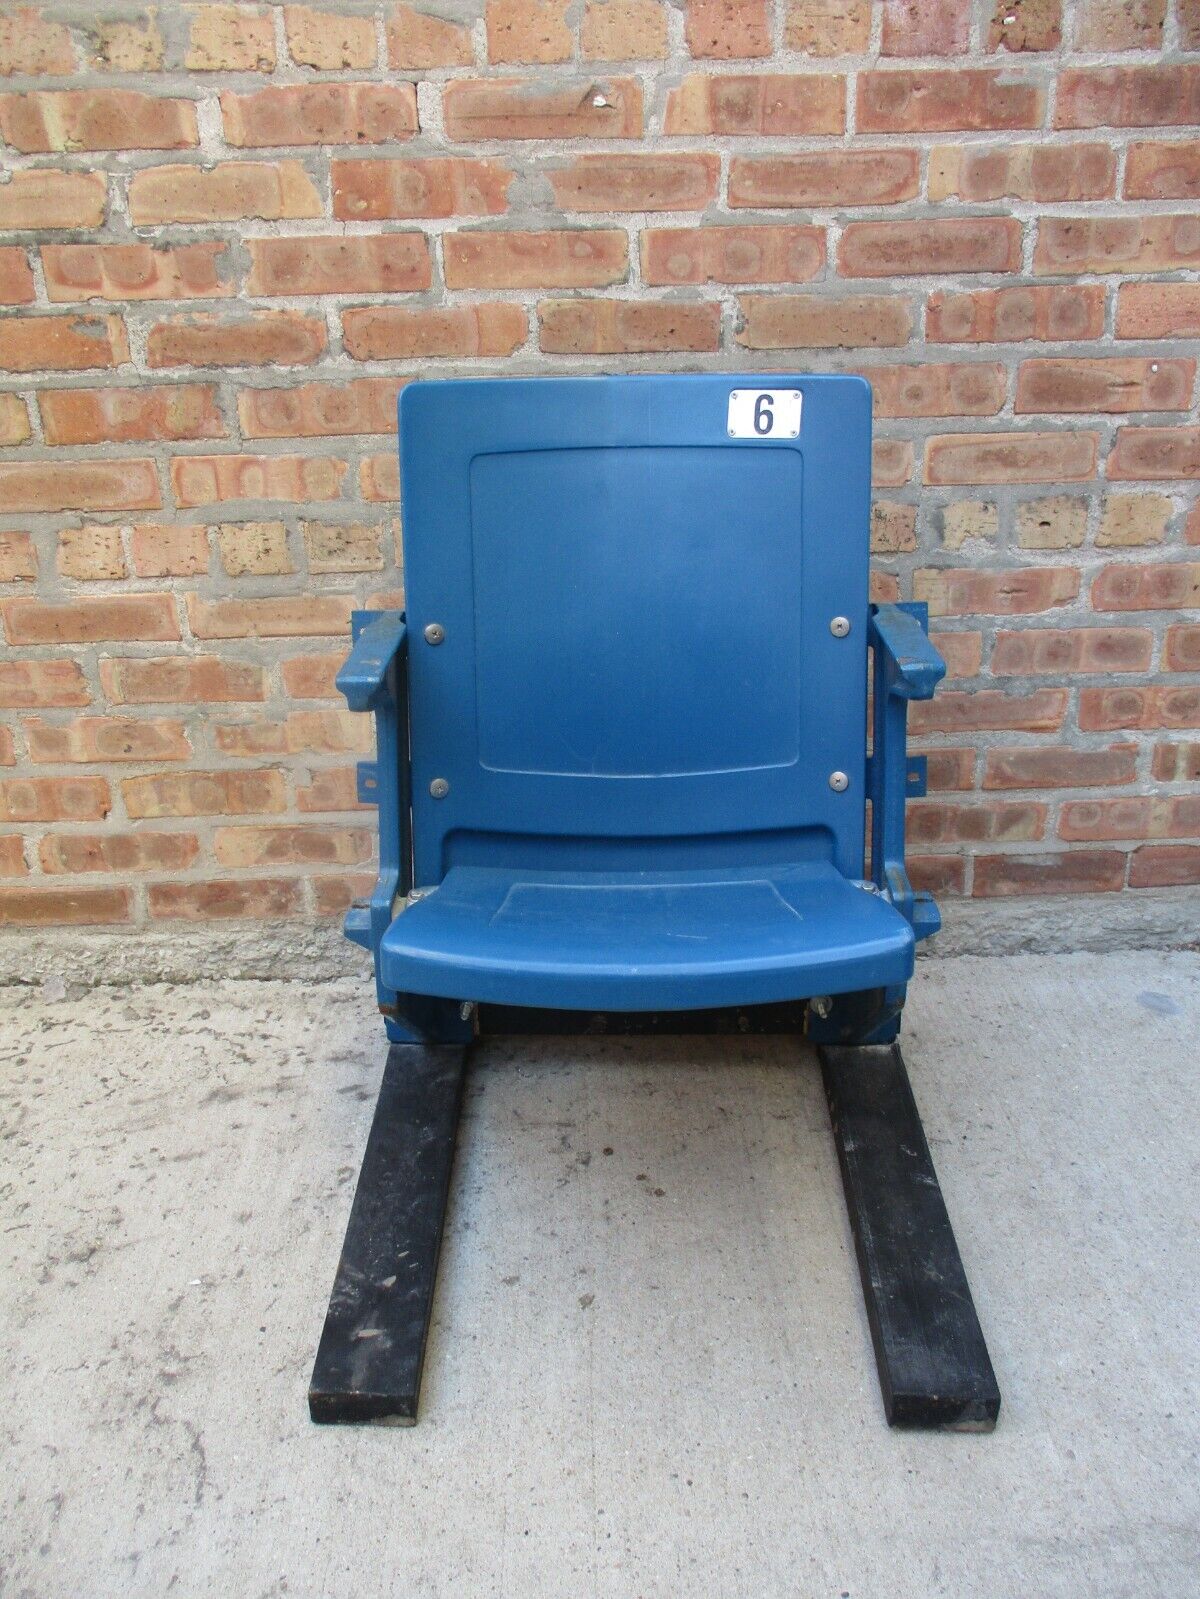 Official Chicago Cubs Wrigley Field Folding Stadium Seat Chair #6 Memorabilia 